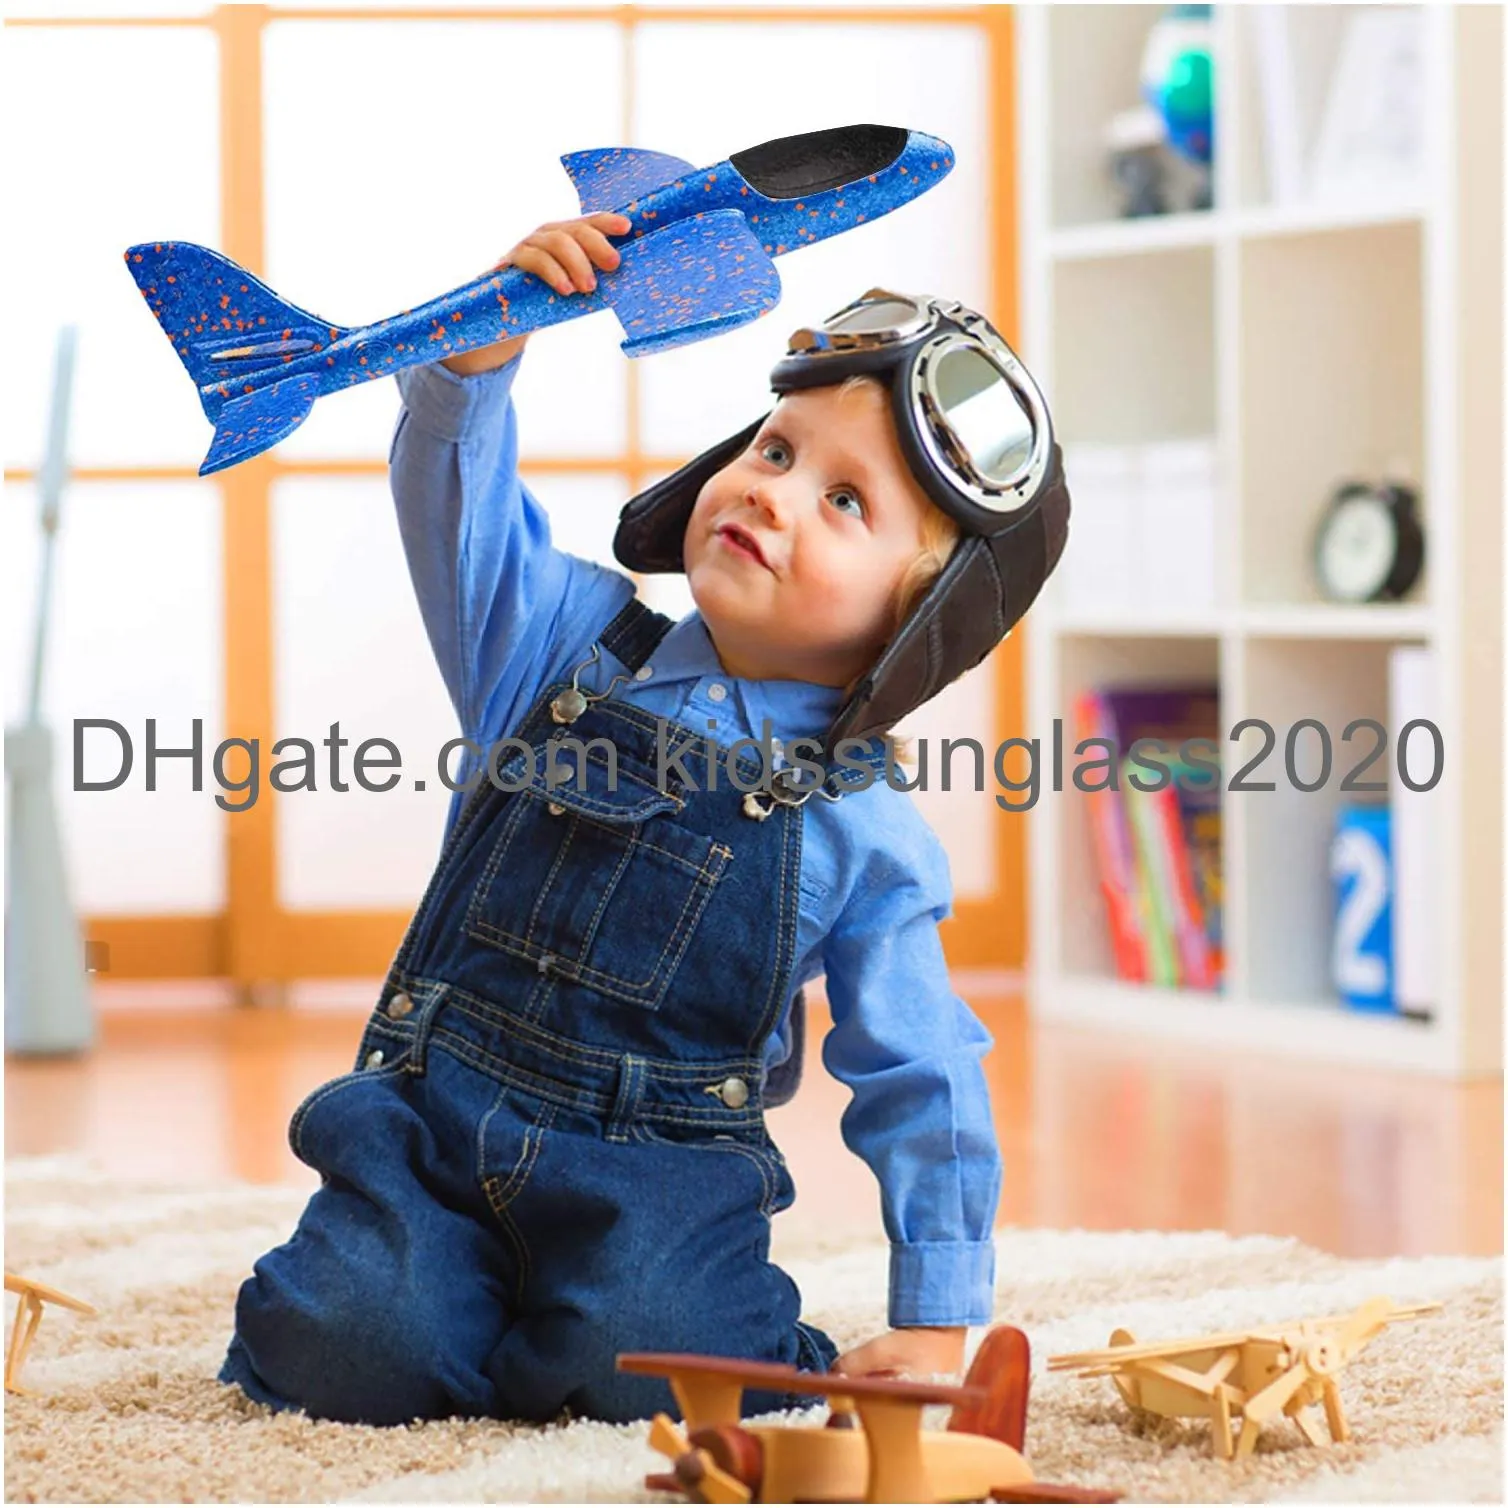 watinc airplane 14.5inch manual foam flying glider planes throwing fun challenging games outdoor sports toy model air plane two flight modes blue orange aircraft for boys girls